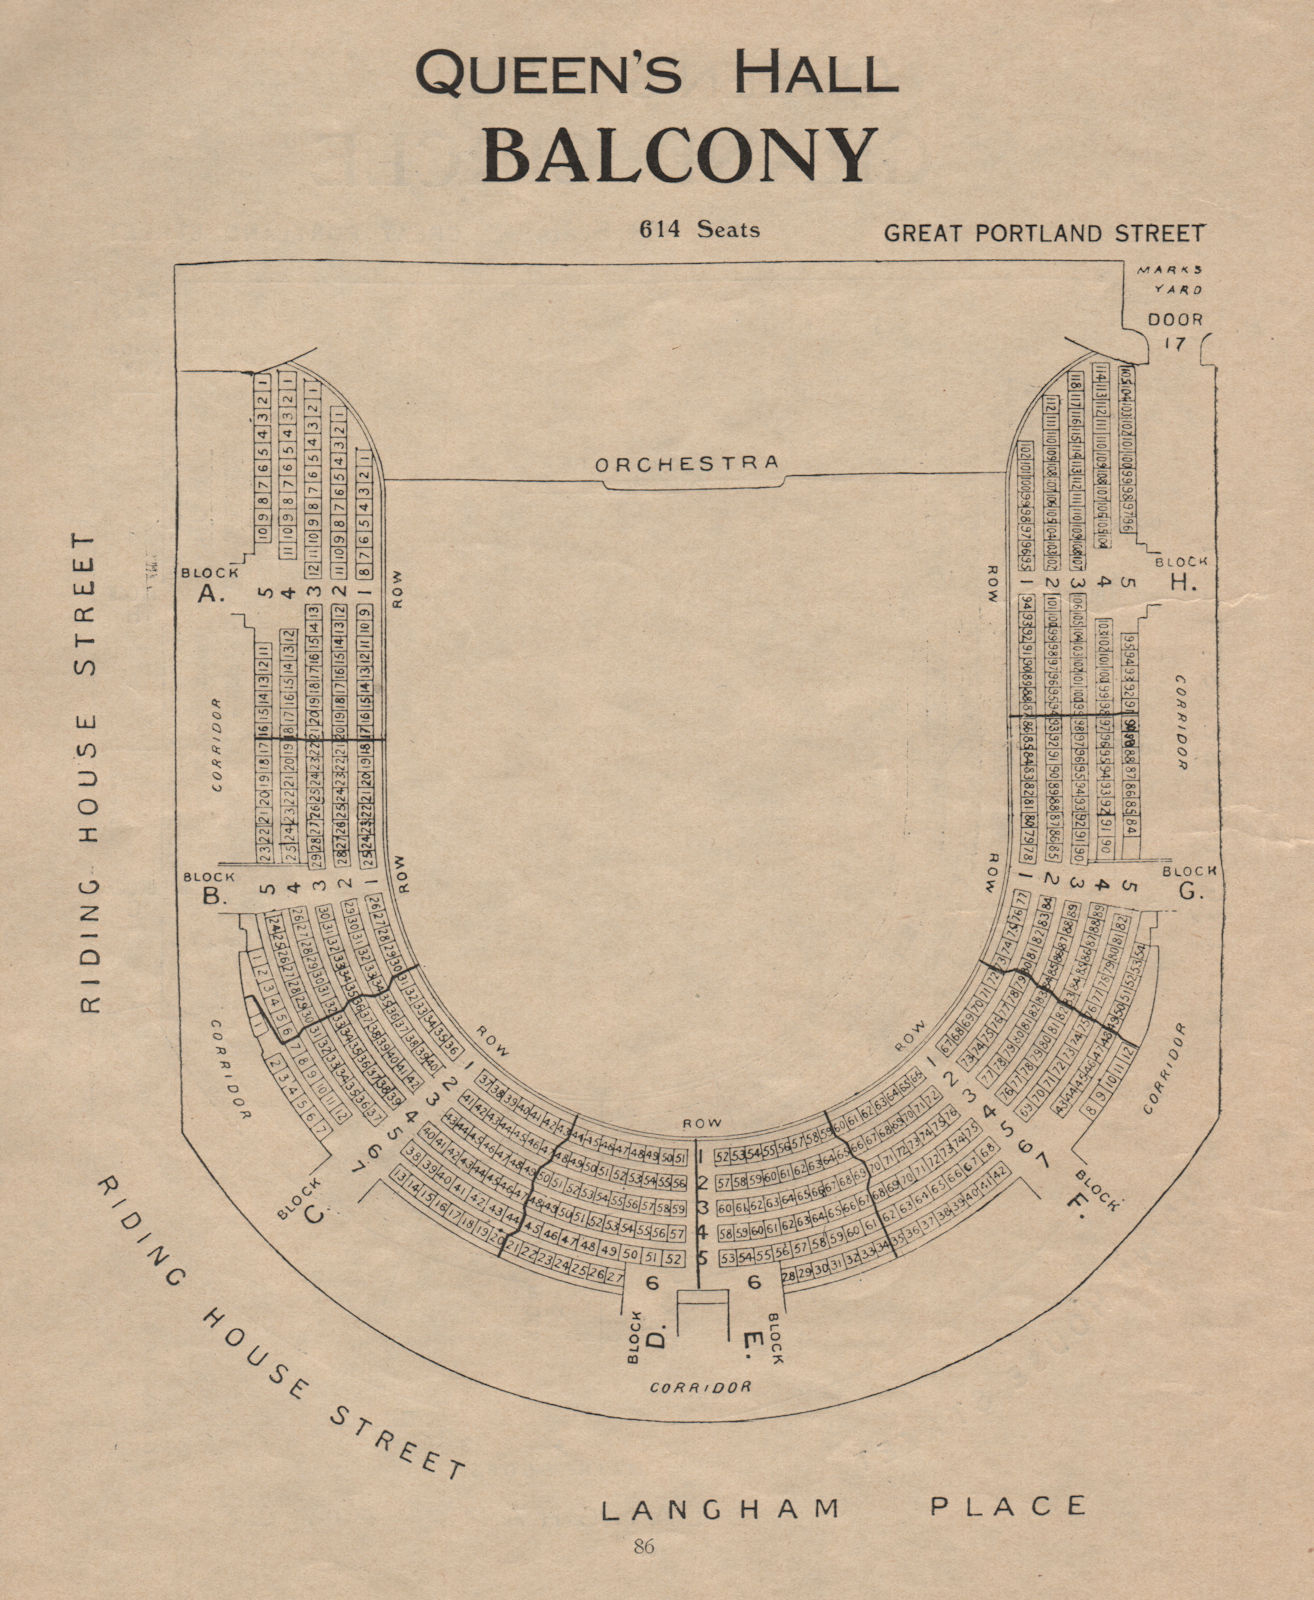 QUEEN'S HALL. Seating plan. Balcony. Concert Hall. Langham Place 1936 print